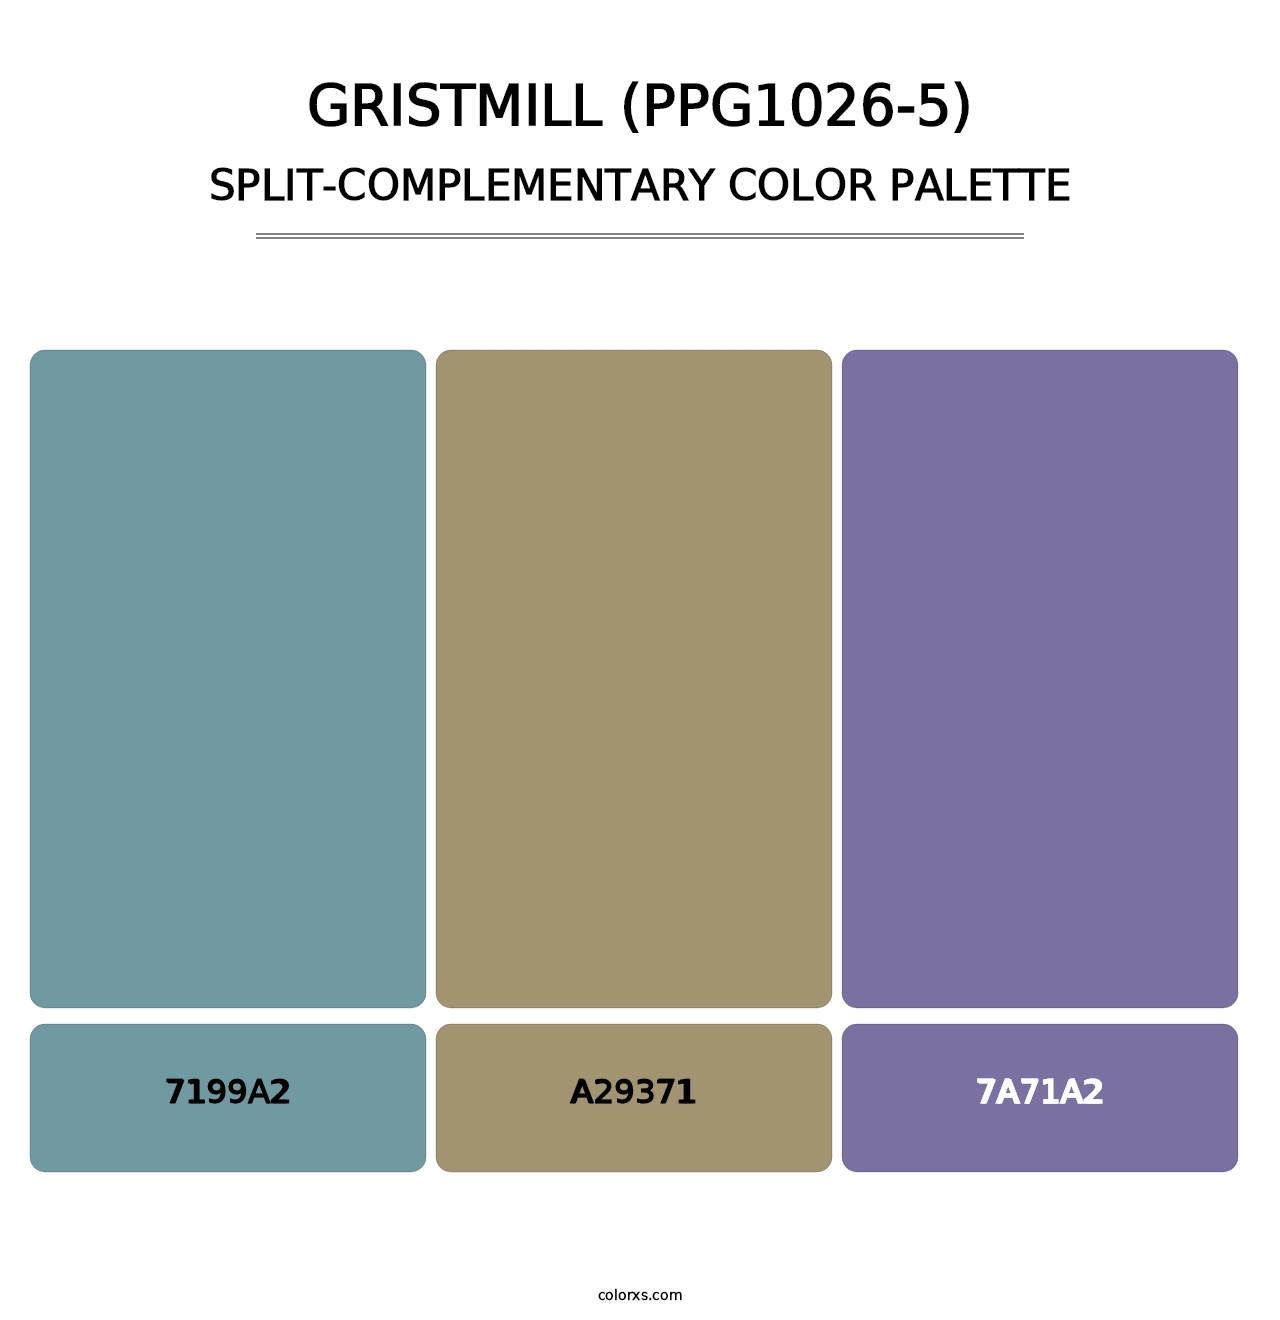 Gristmill (PPG1026-5) - Split-Complementary Color Palette